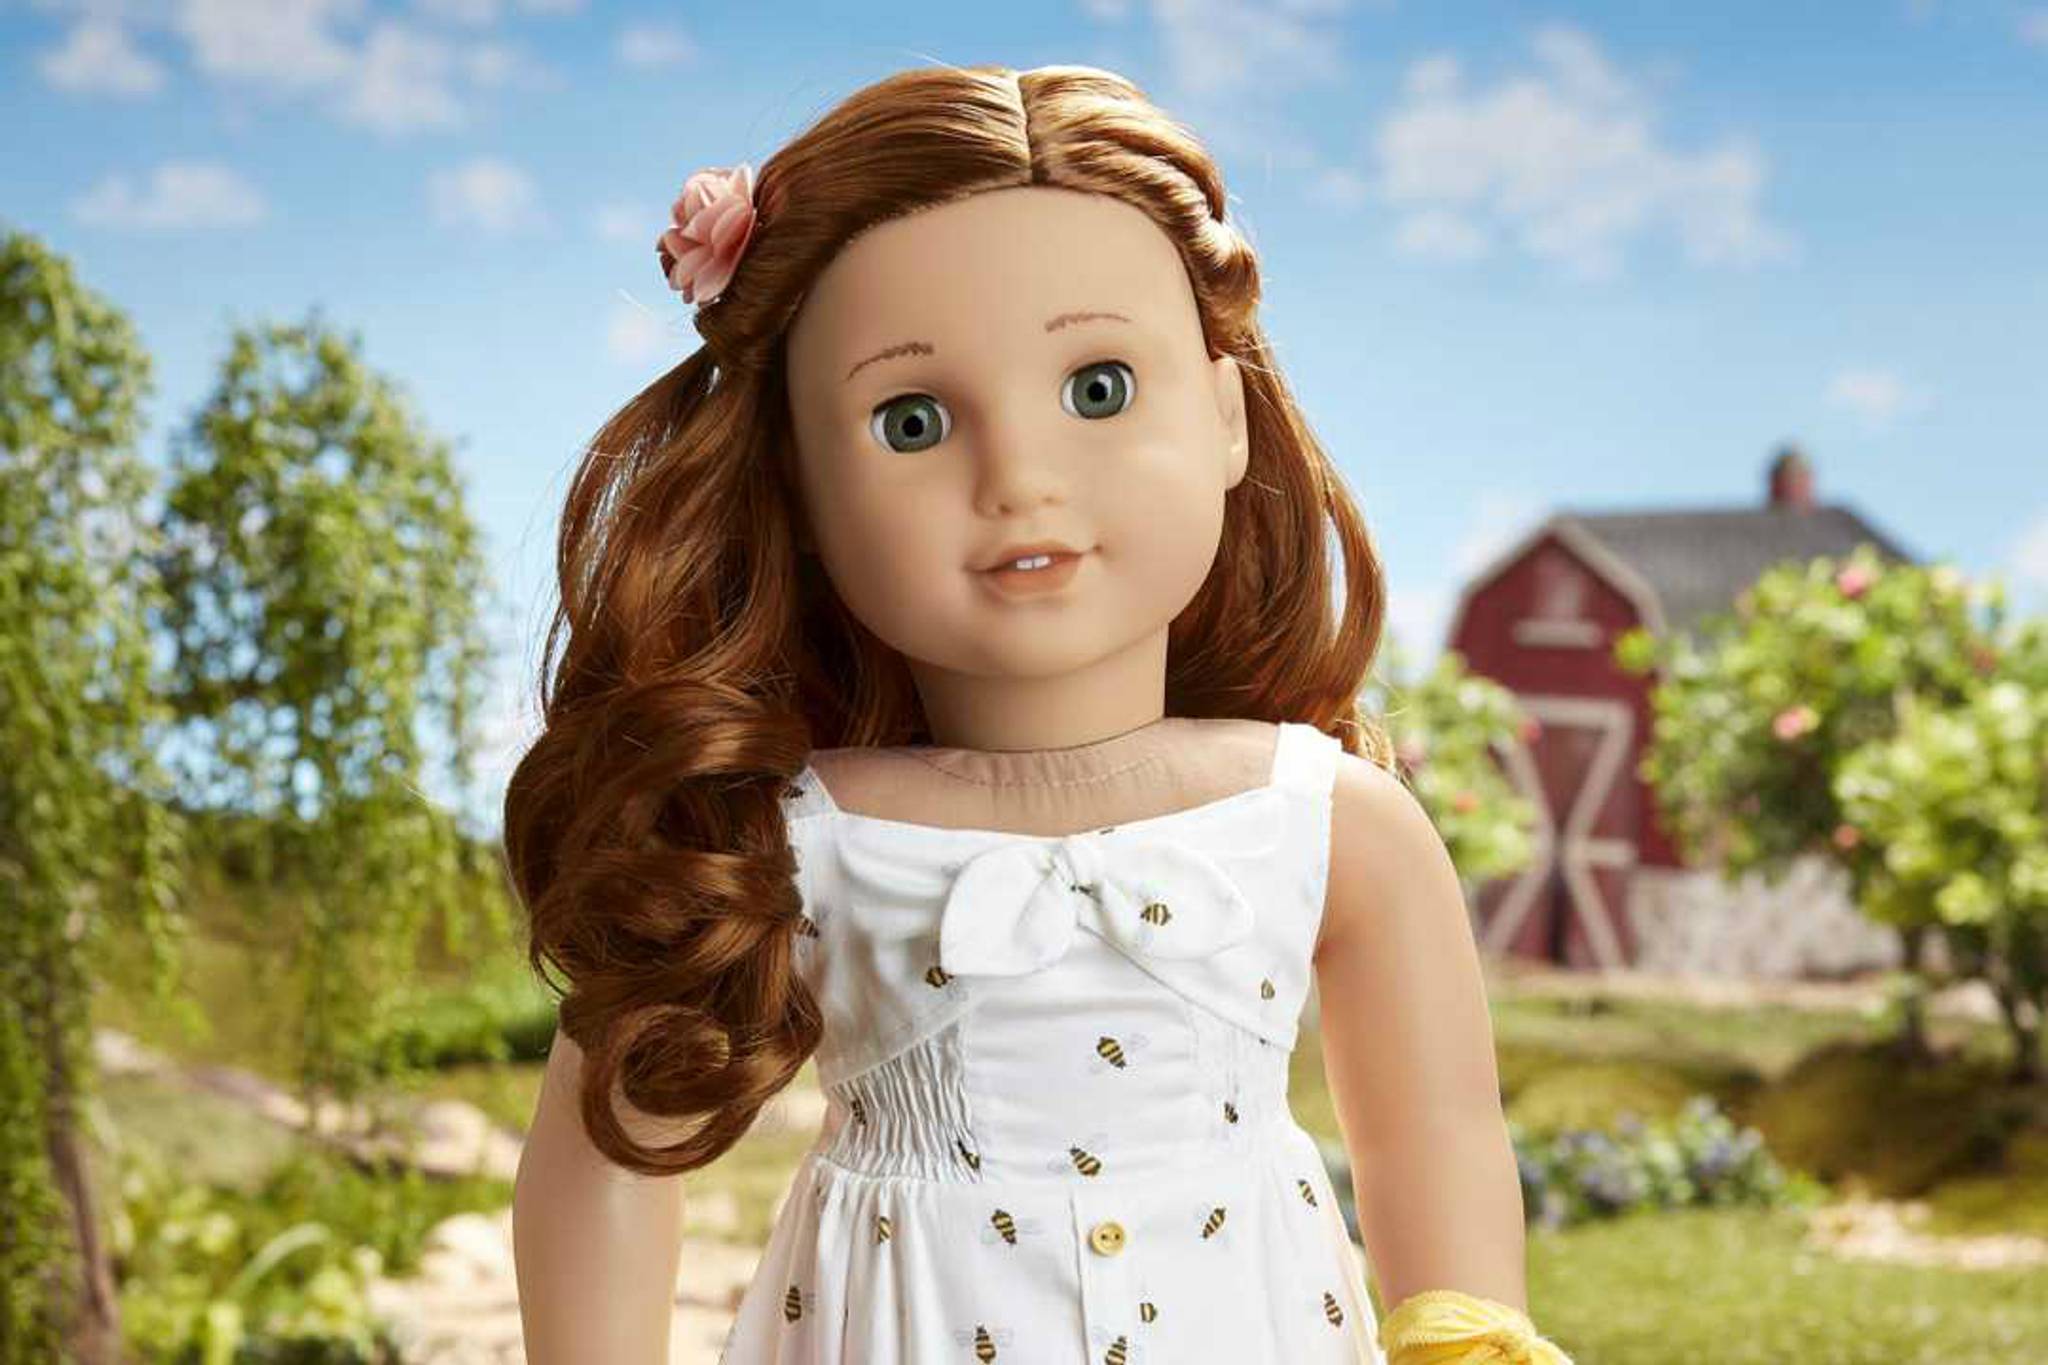 American Girl helps parents manage kids' screentime